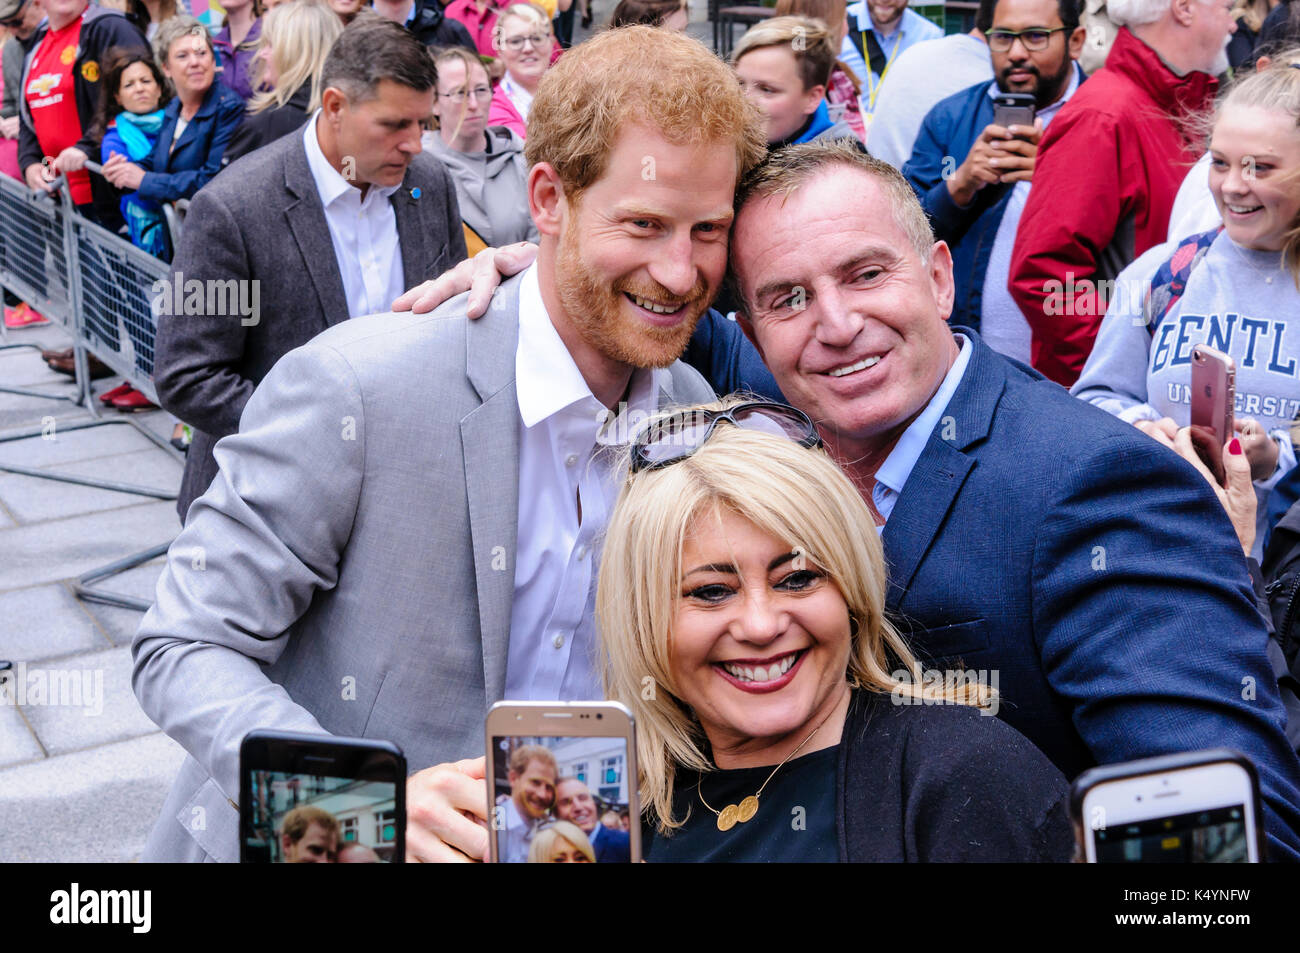 Belfast, Northern Ireland. 07/09/2017 -  People have their photos taken with Prince Harry as he meets the public during walkabout in Belfast on his first Northern Ireland visit. Stock Photo